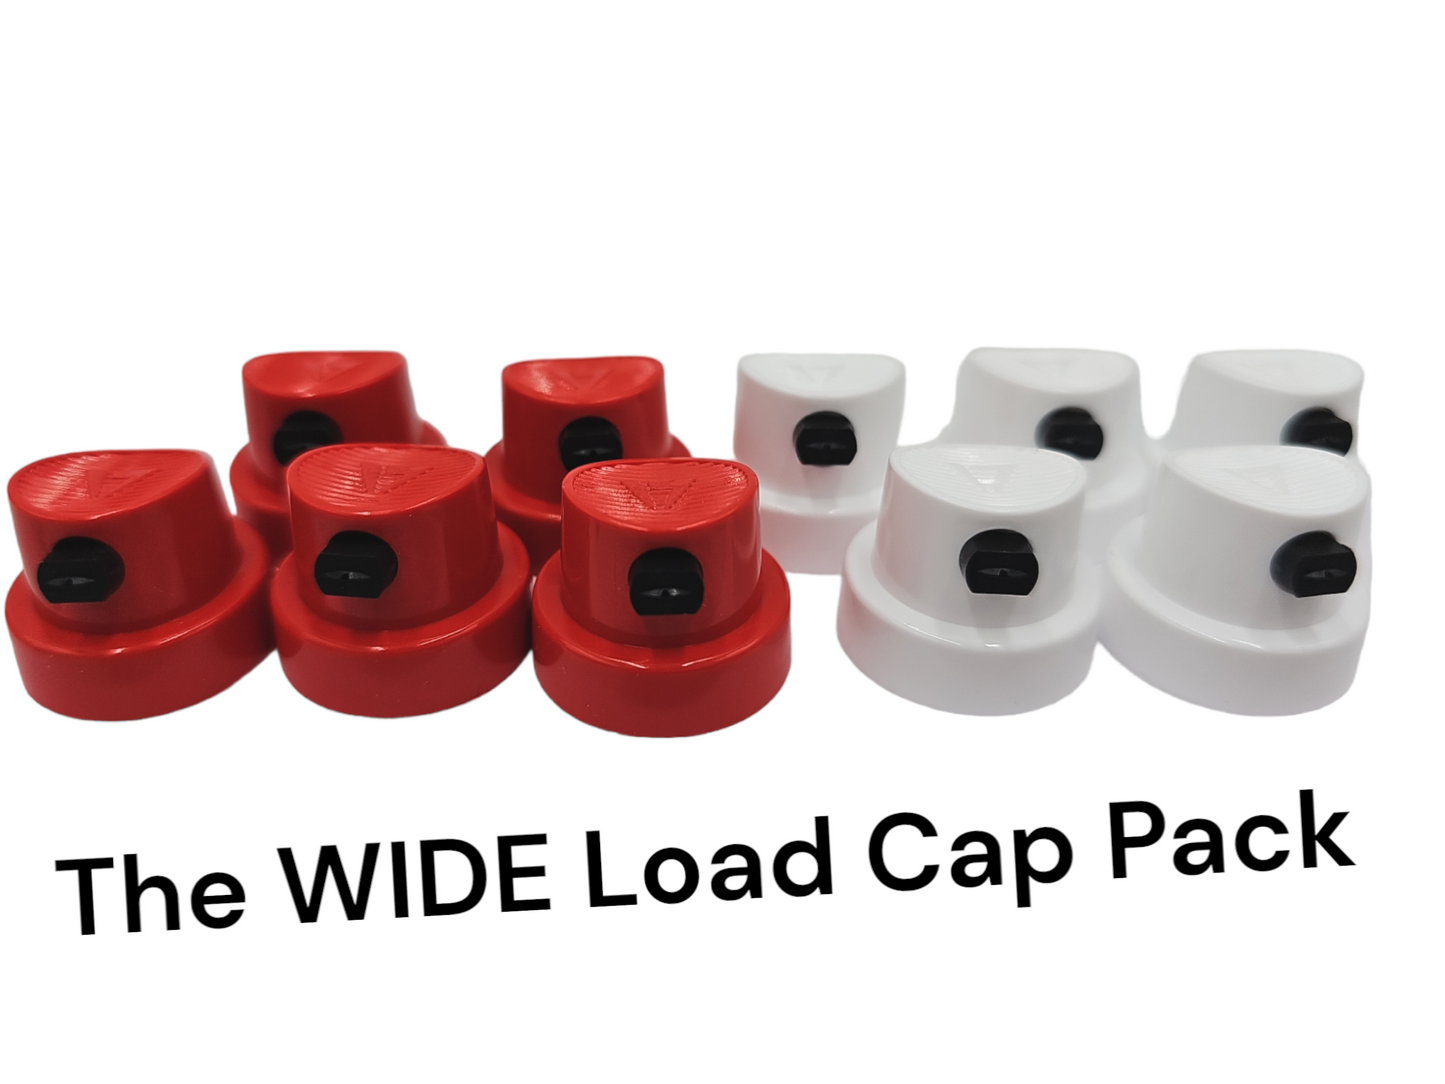 The WIDE Load Cap Pack